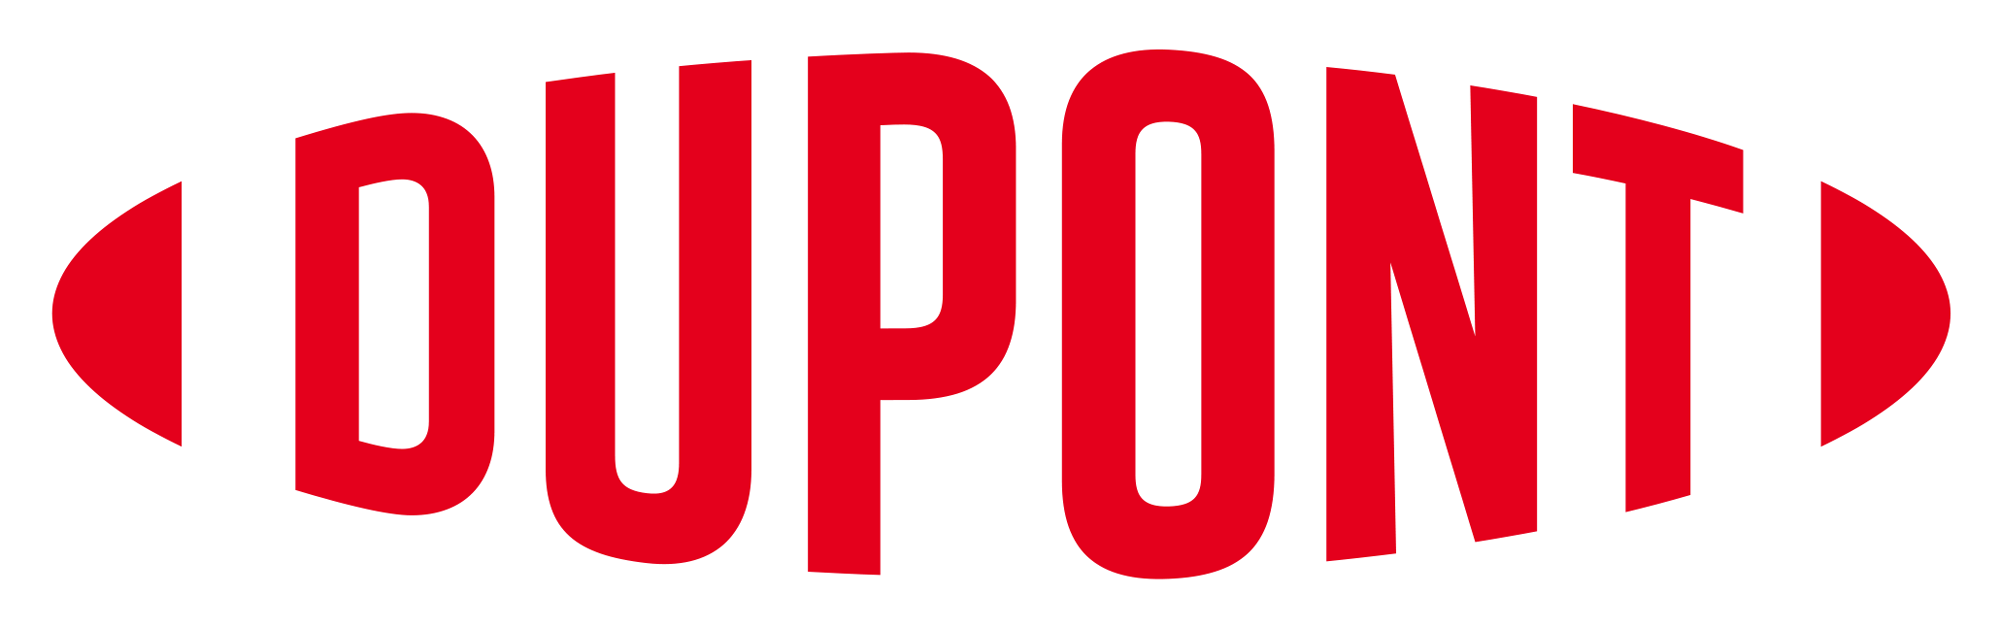 In Red Oval Logo - Brand New: New Logo and Identity for DuPont by Lippincott